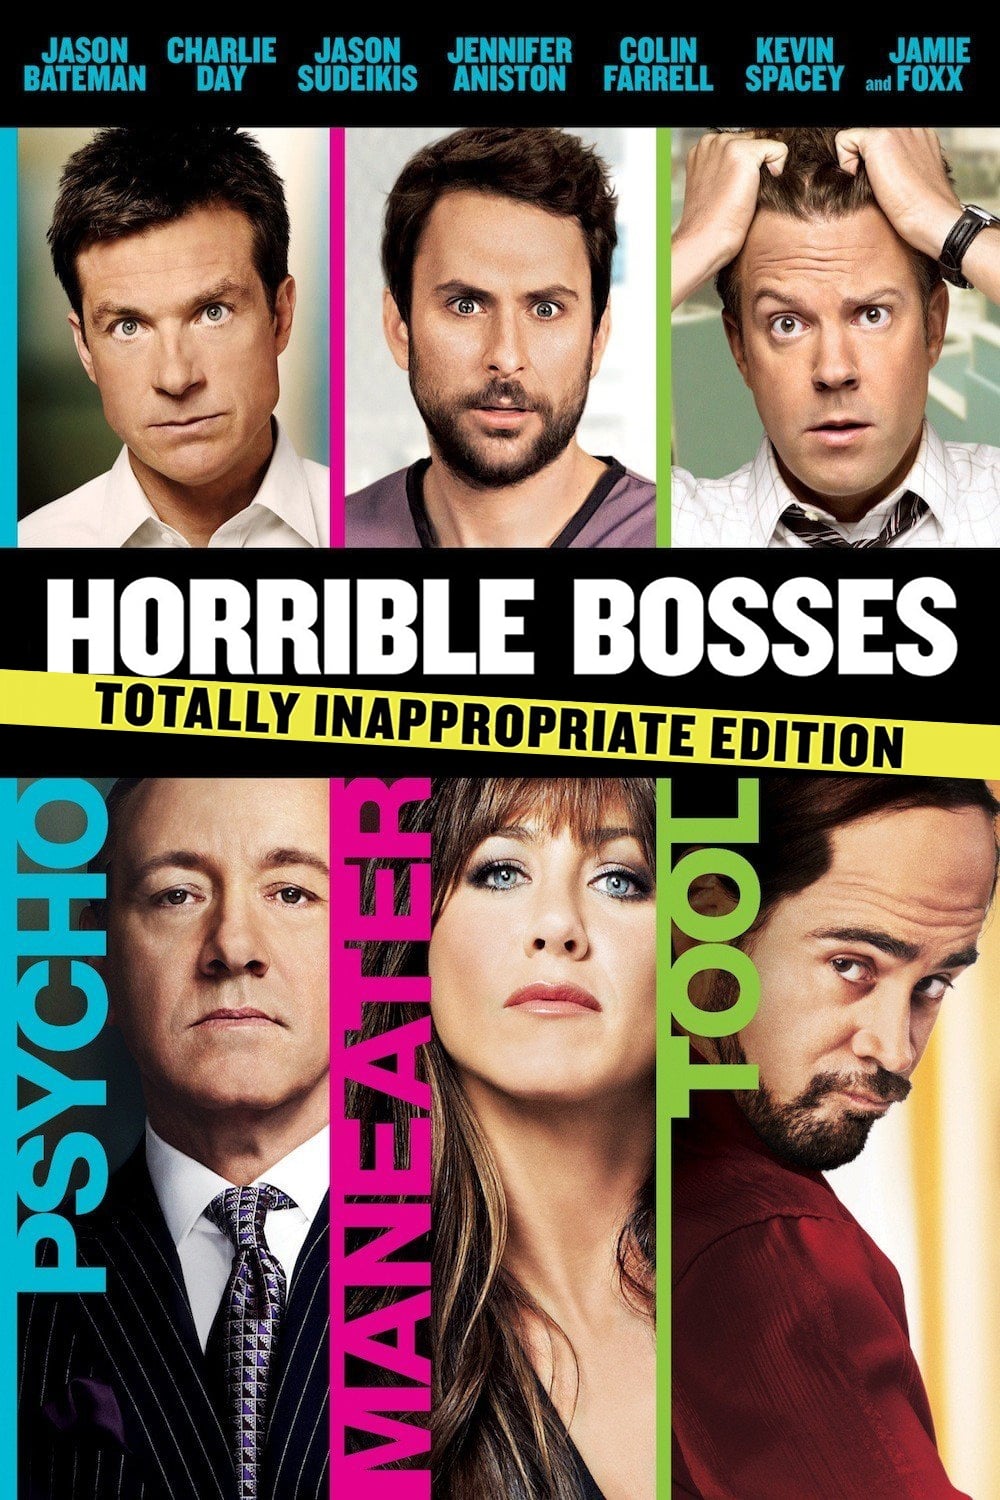 Movies Like The Hangover - Horrible Bosses